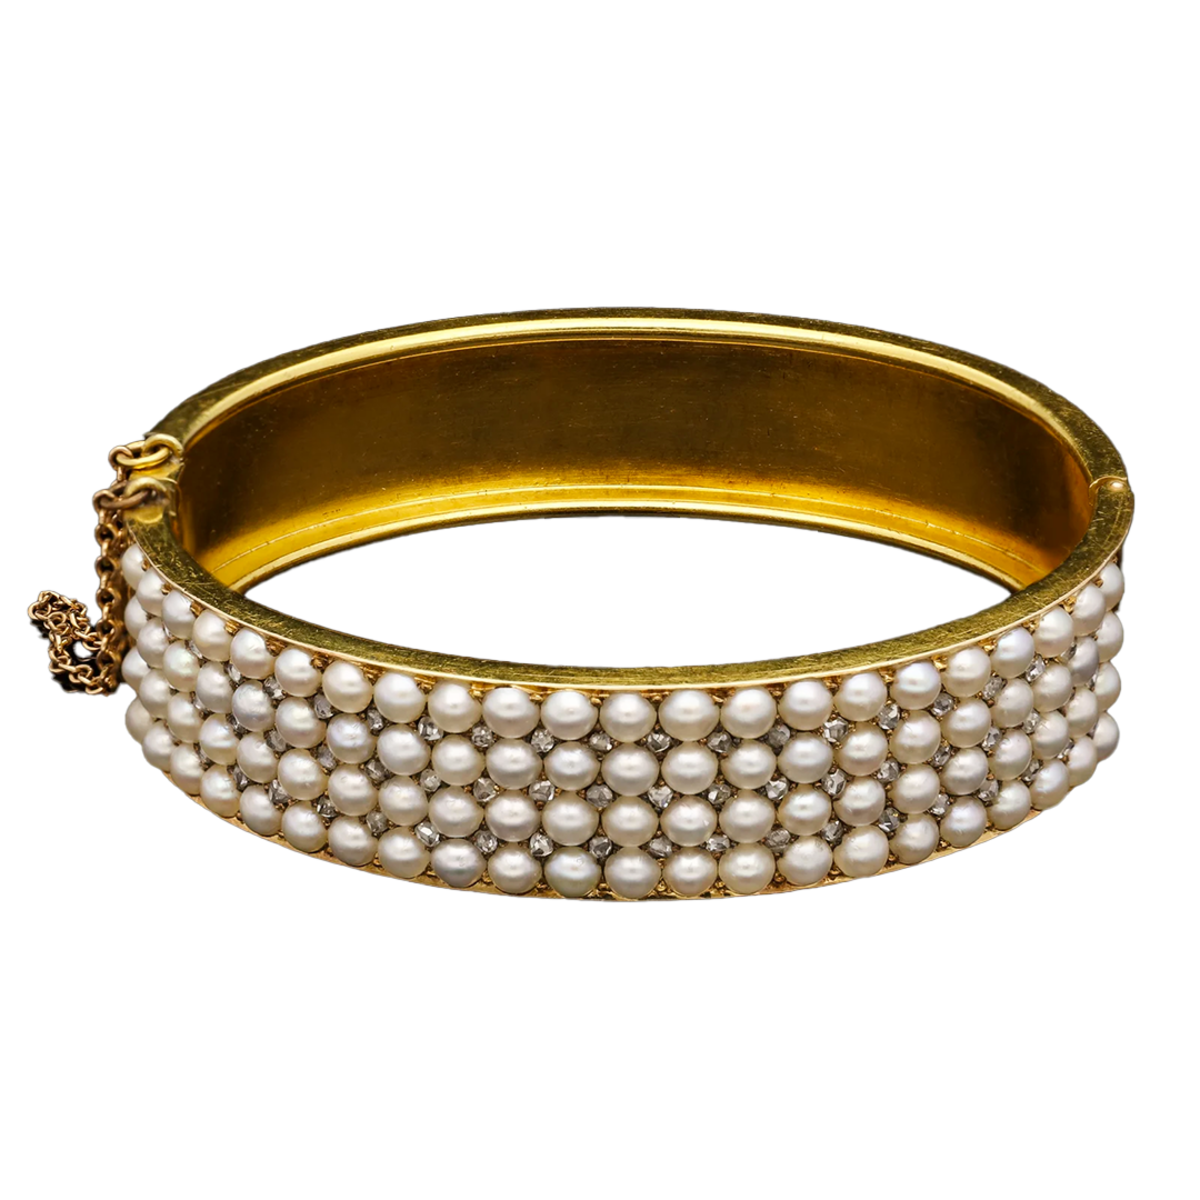 English Victorian 15KT Yellow Gold Pearl & Diamond Bangle Bracelet front view